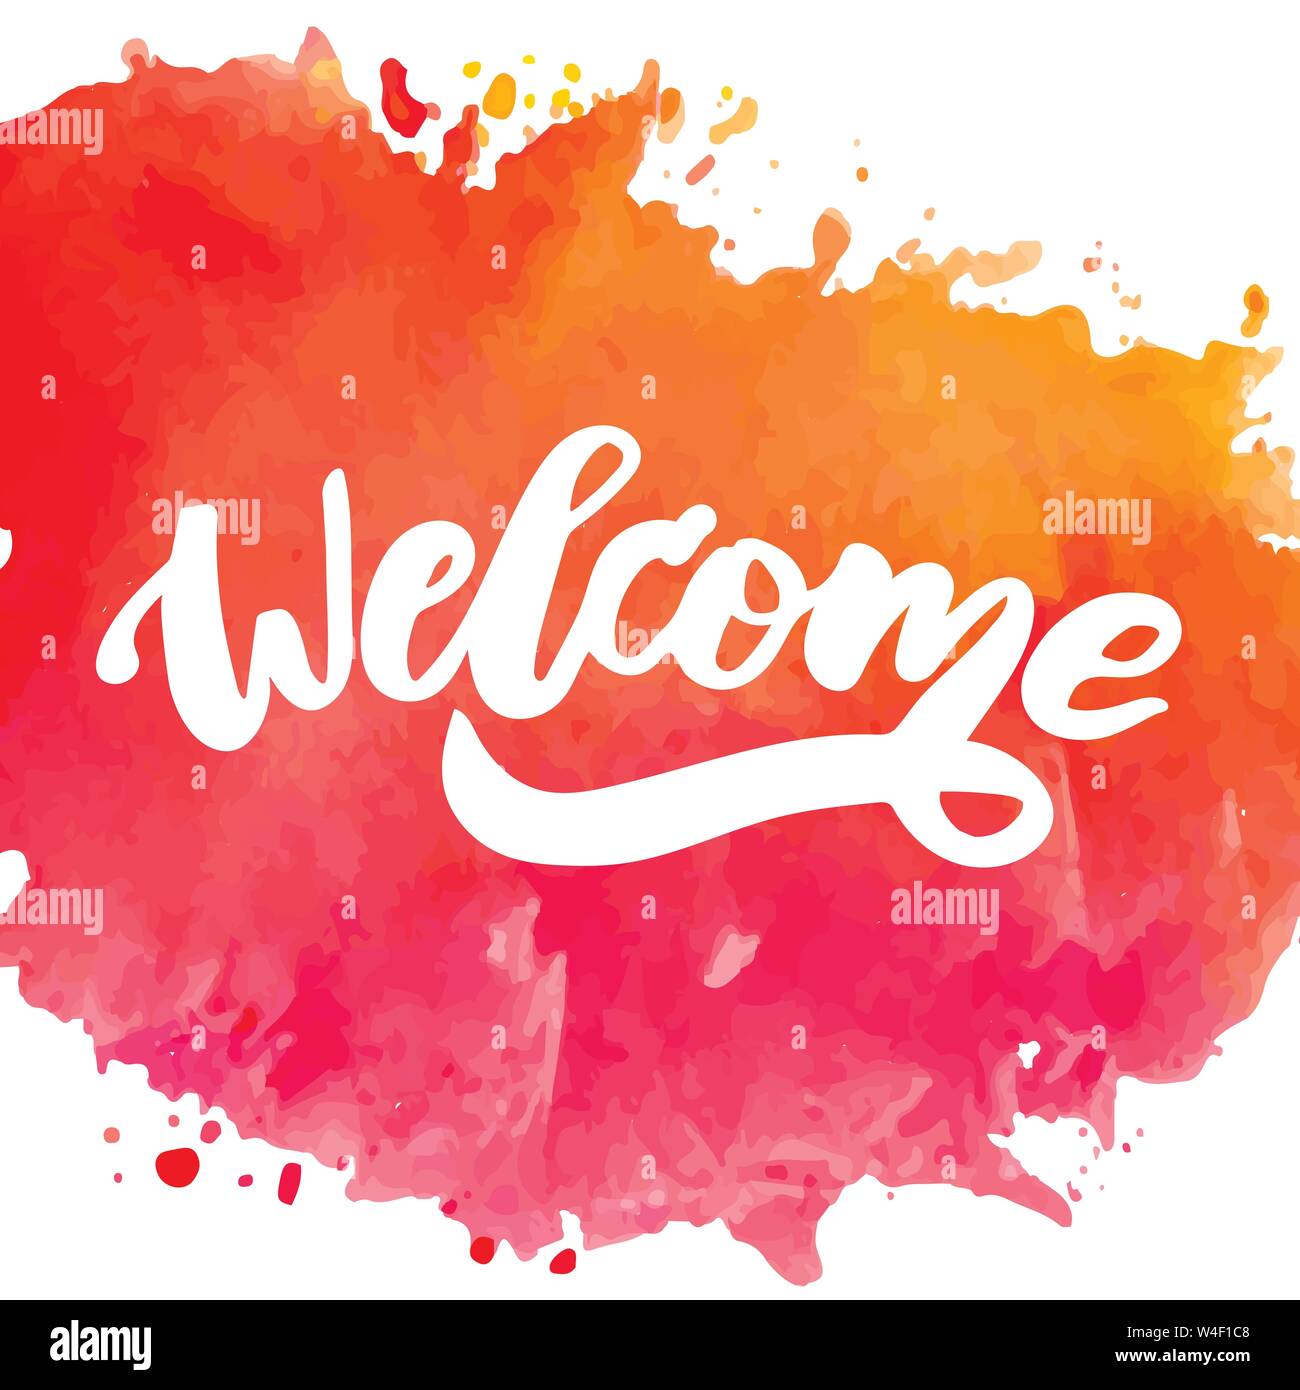 Featured image of post Watercolor September Calligraphy / Download 680+ royalty free hello september calligraphy vector images.